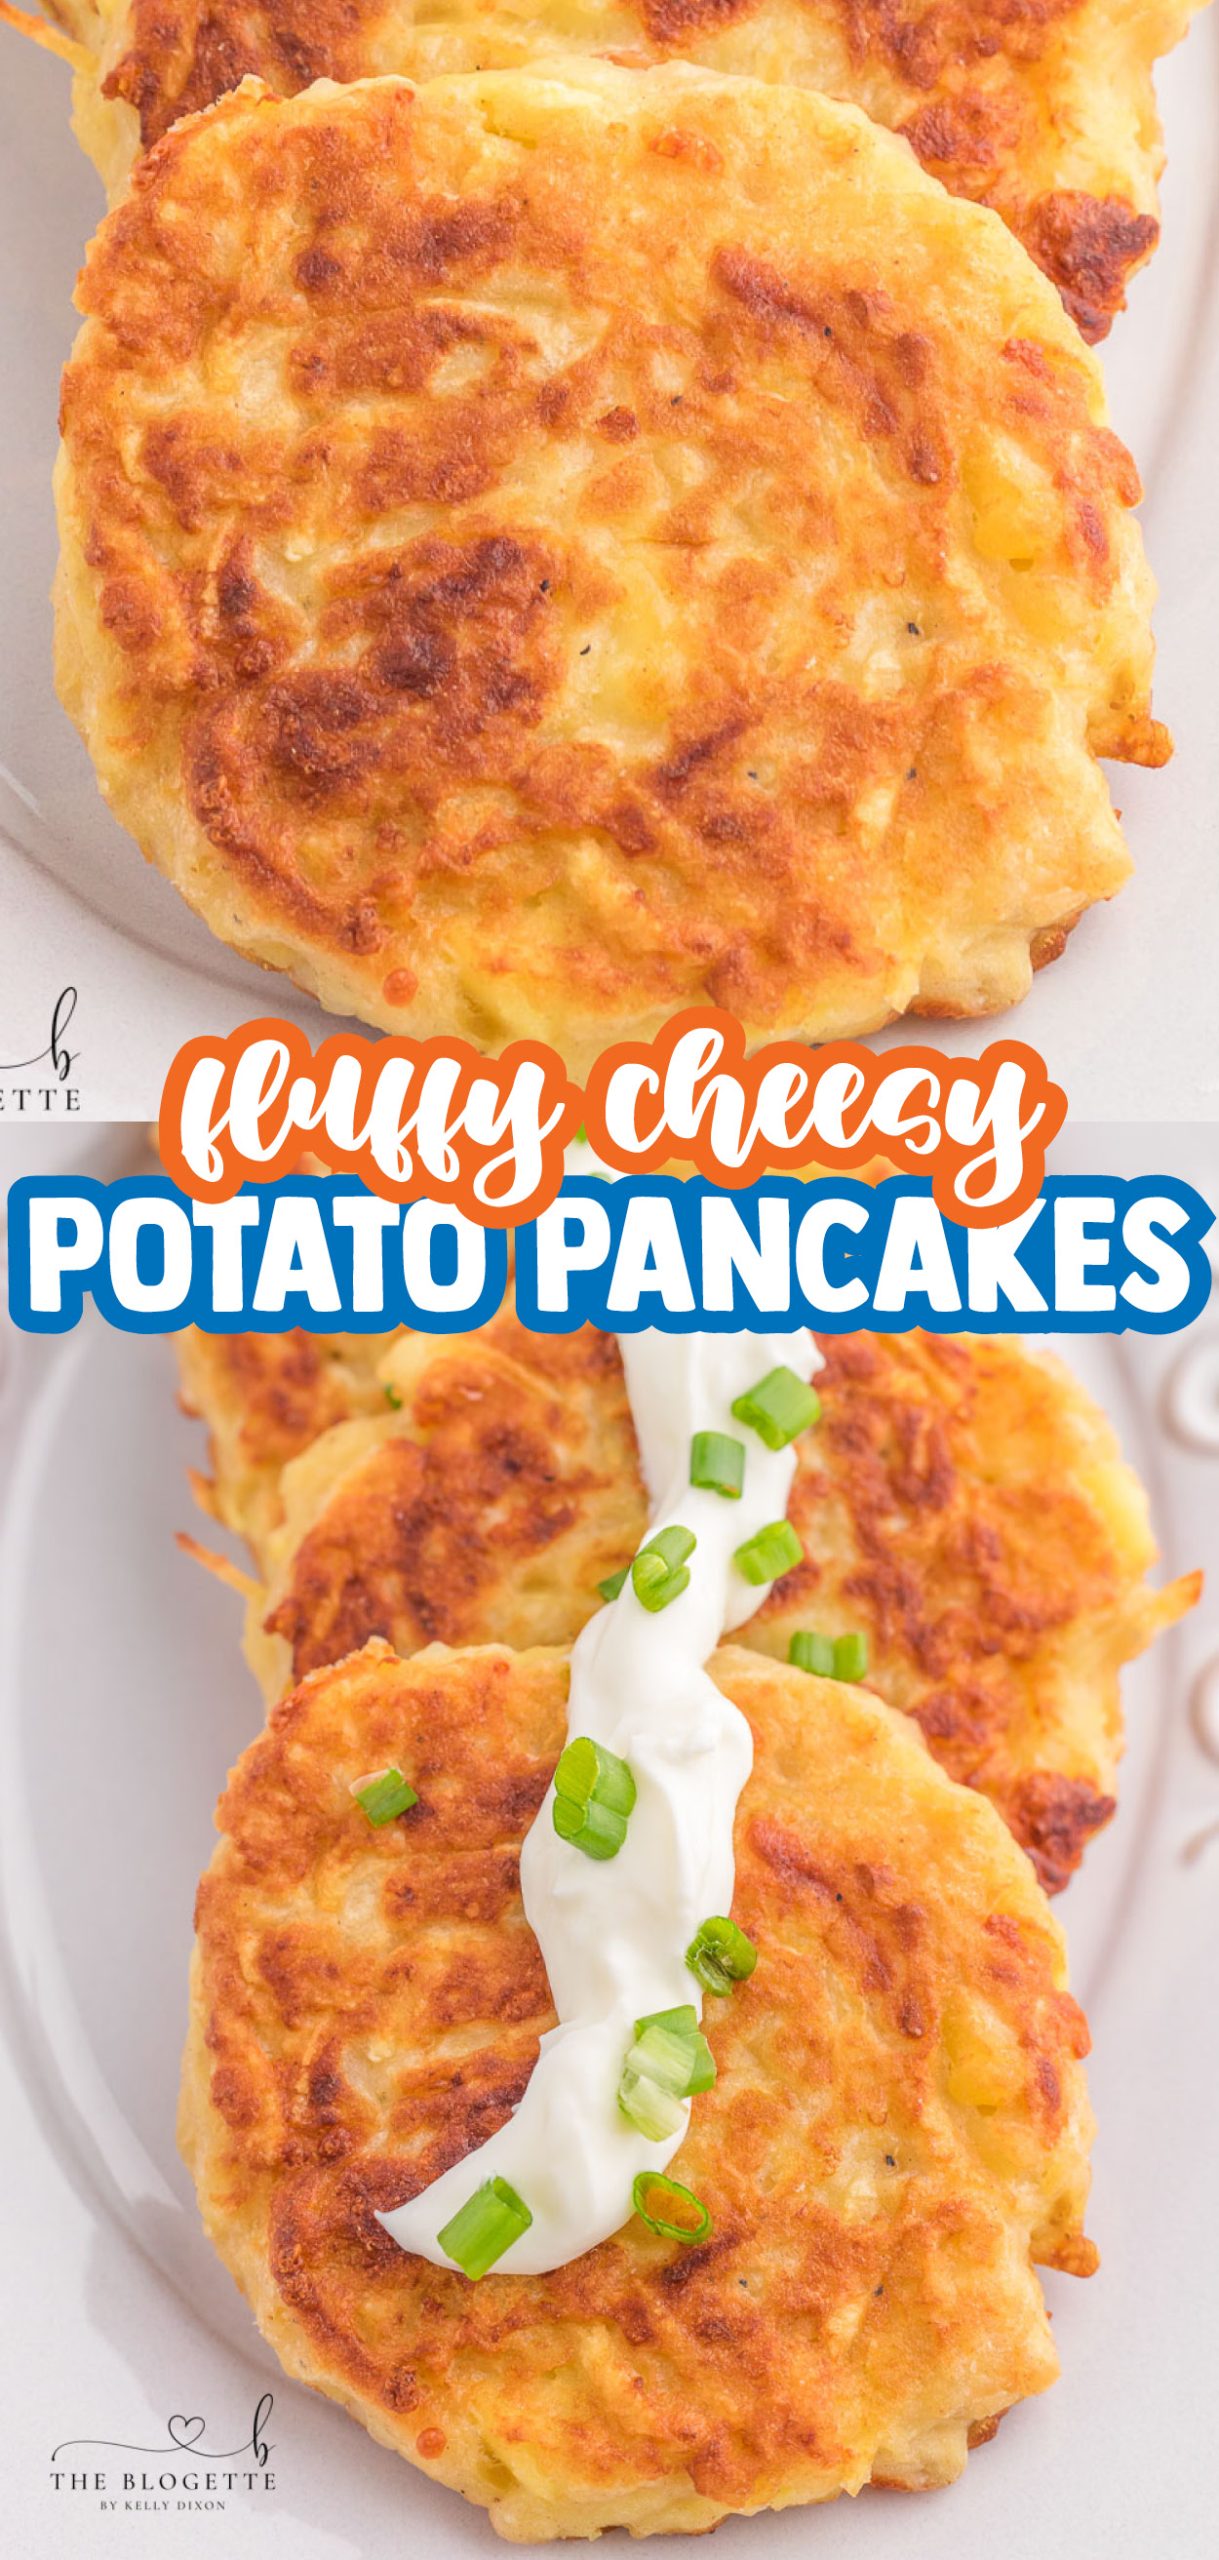 Potato Pancakes are fluffy and cheesy pancakes made with leftover mashed potatoes and pan-fried to crispy golden brown perfection.